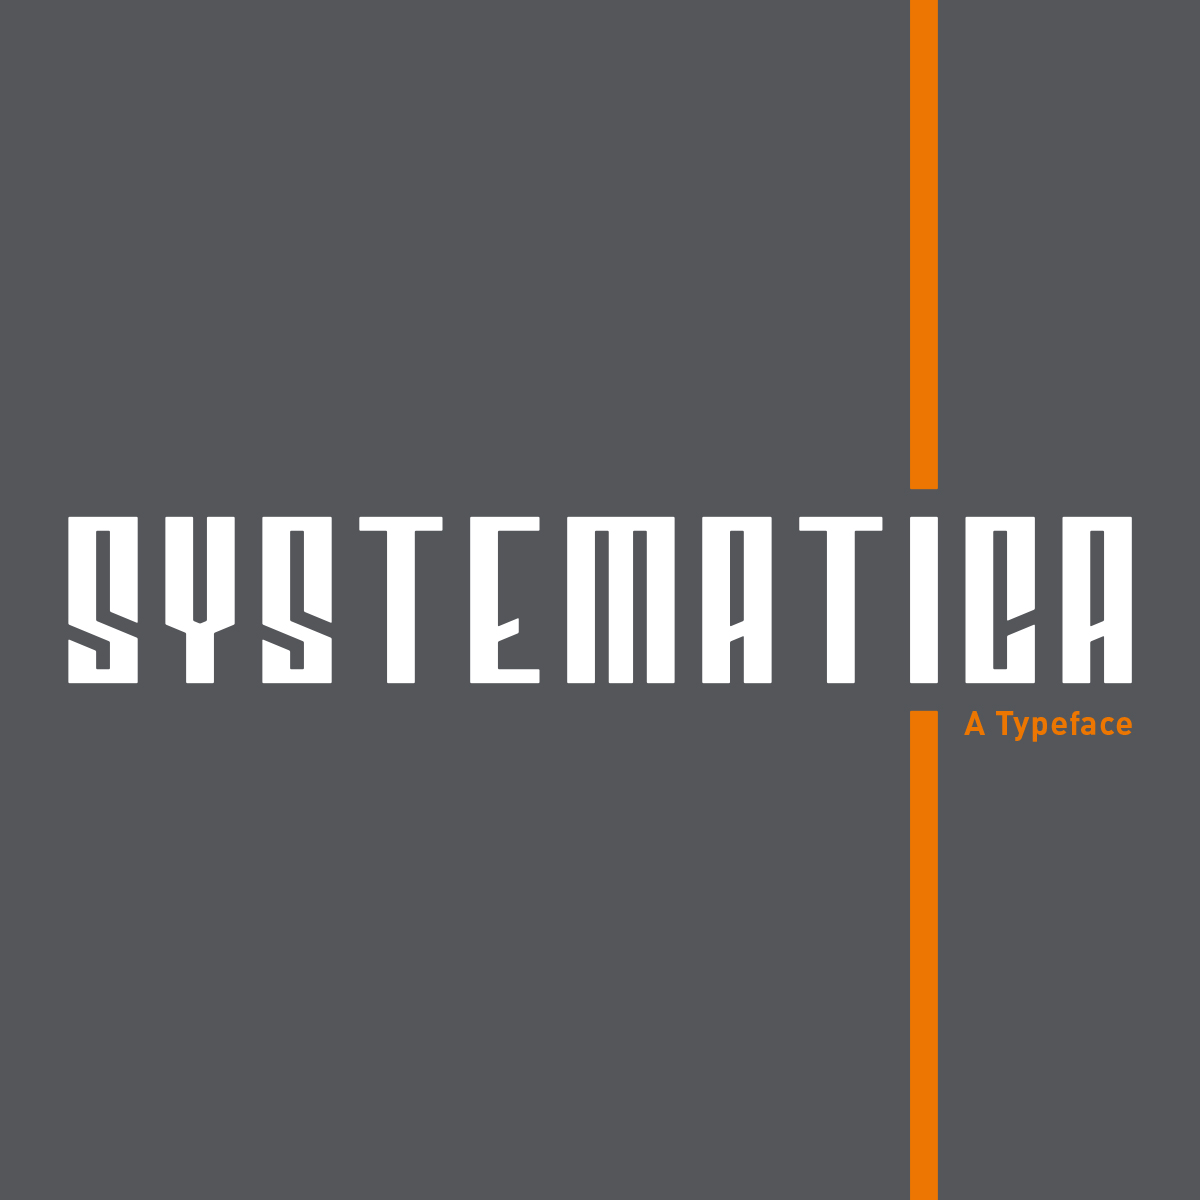 featured image:Systematica | A Typeface